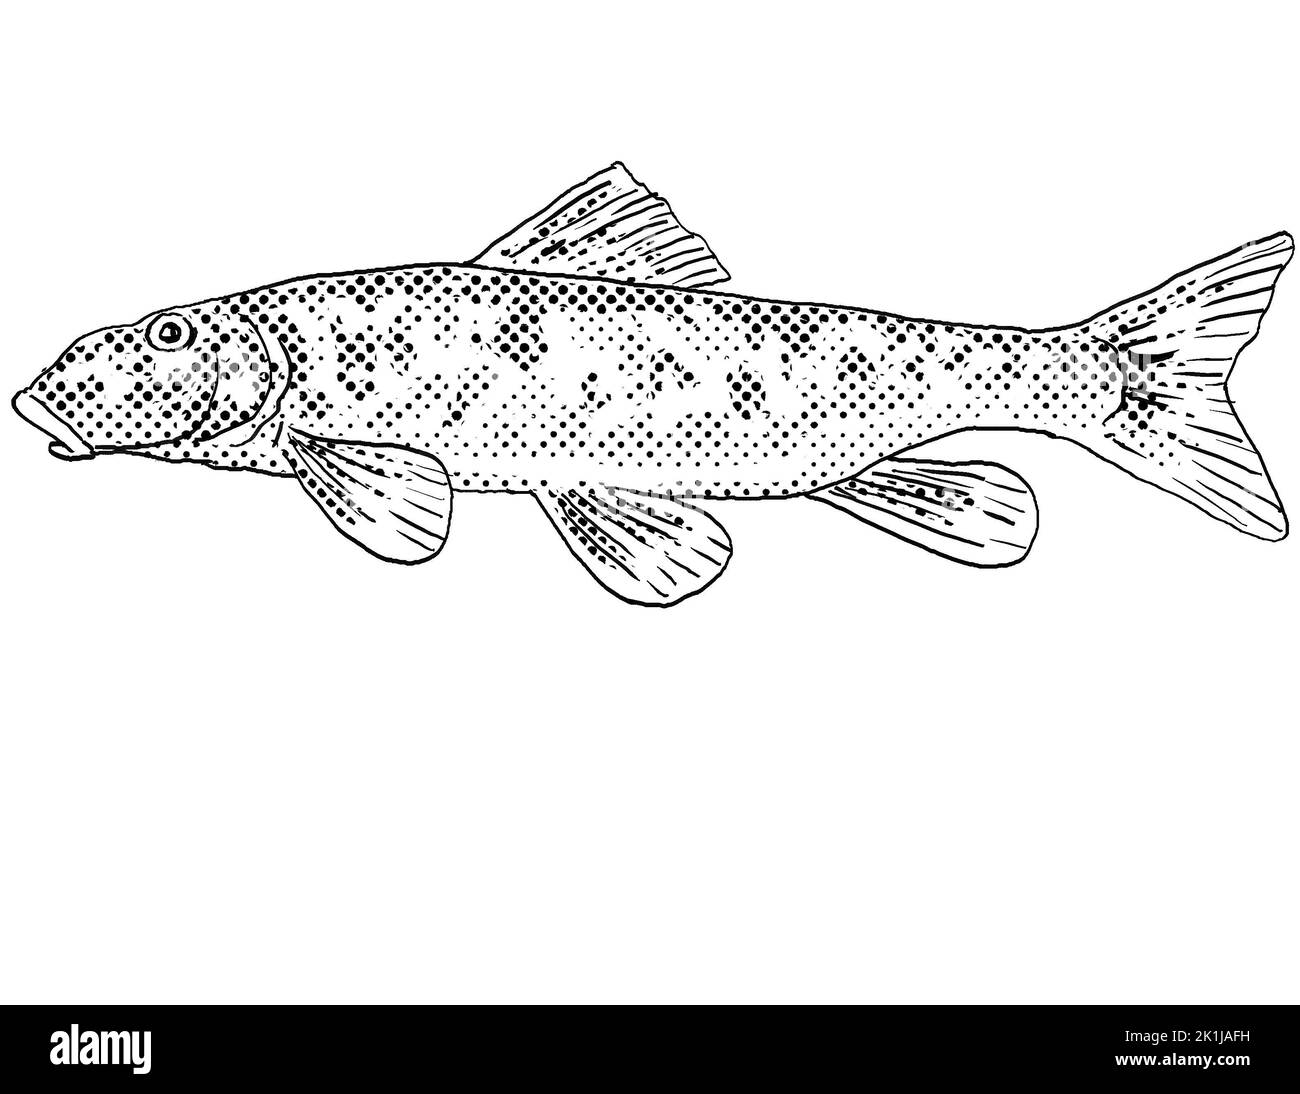 Cartoon style line drawing of a northern hogsucker or Hypentelium nigricans a freshwater fish endemic to North America with halftone dots shading on i Stock Photo